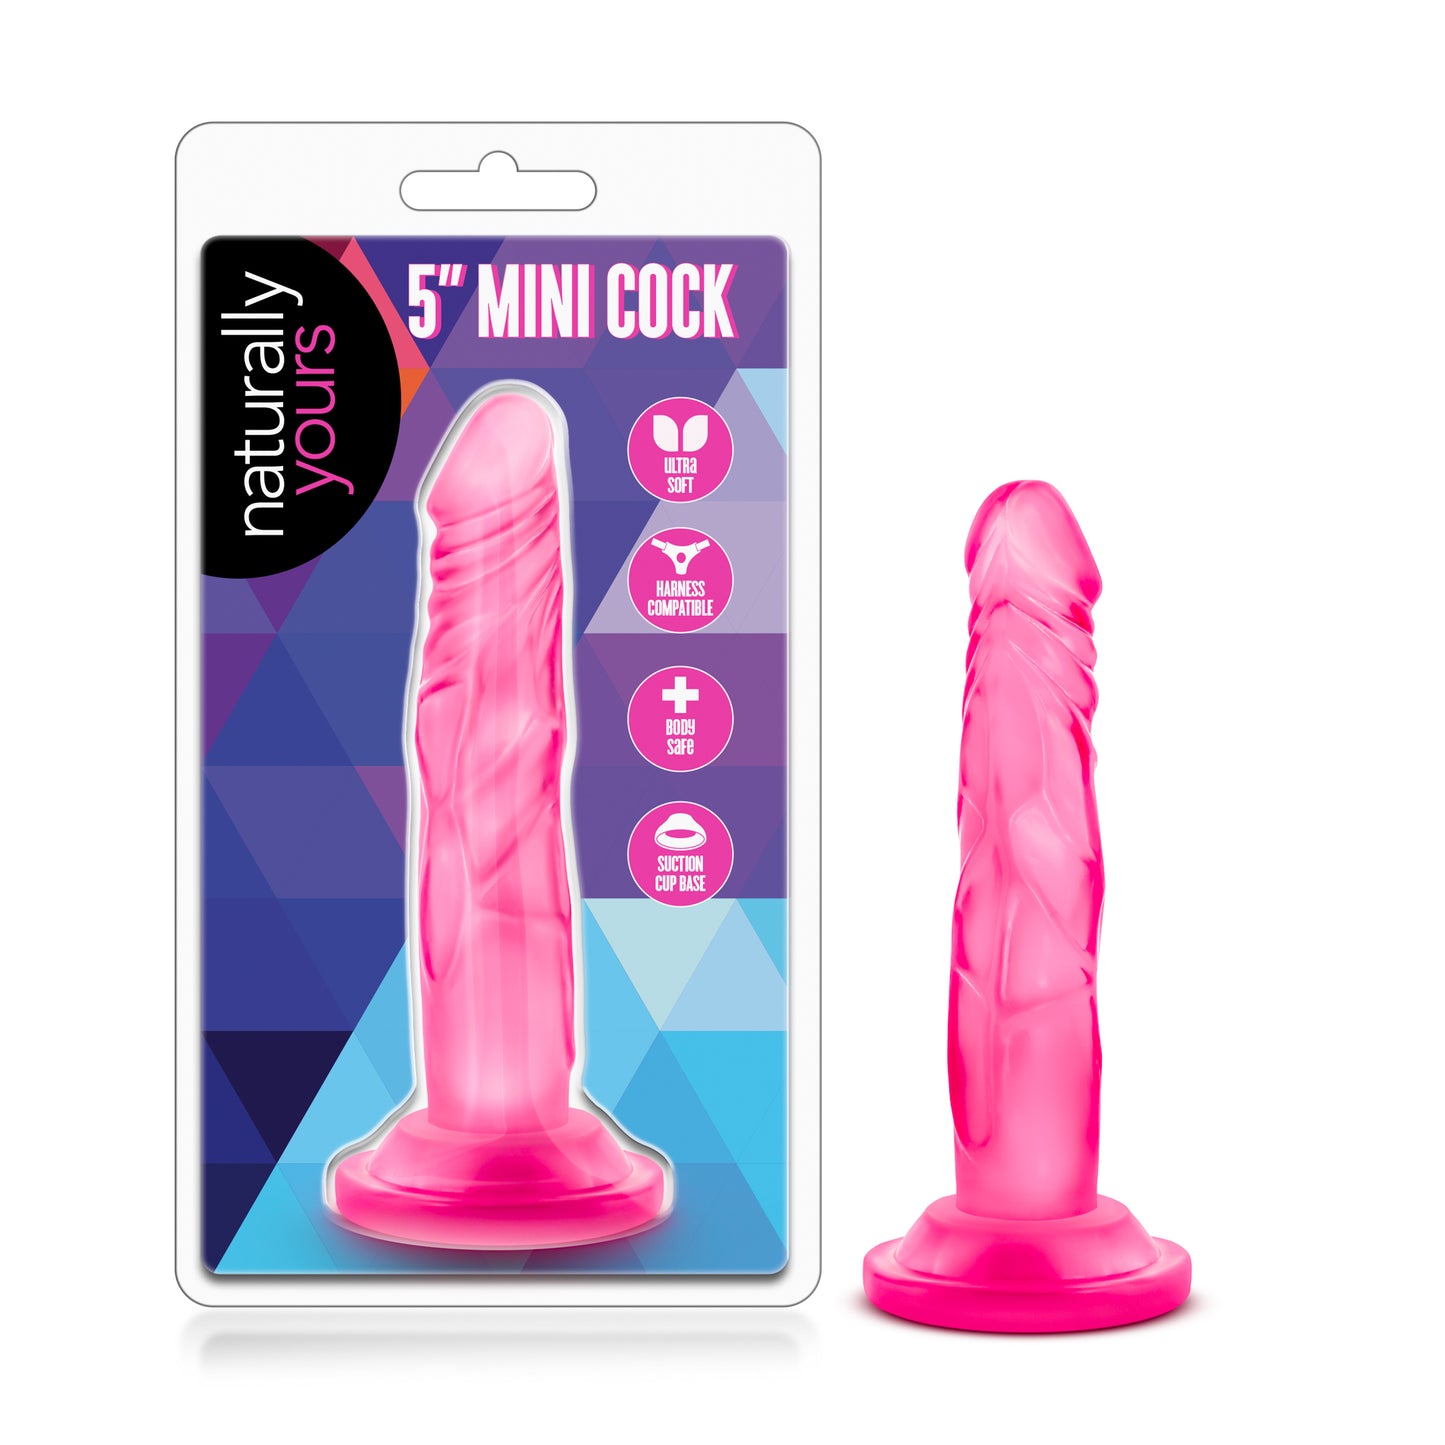 Naturally Yours - 5 Inch Mini Cock